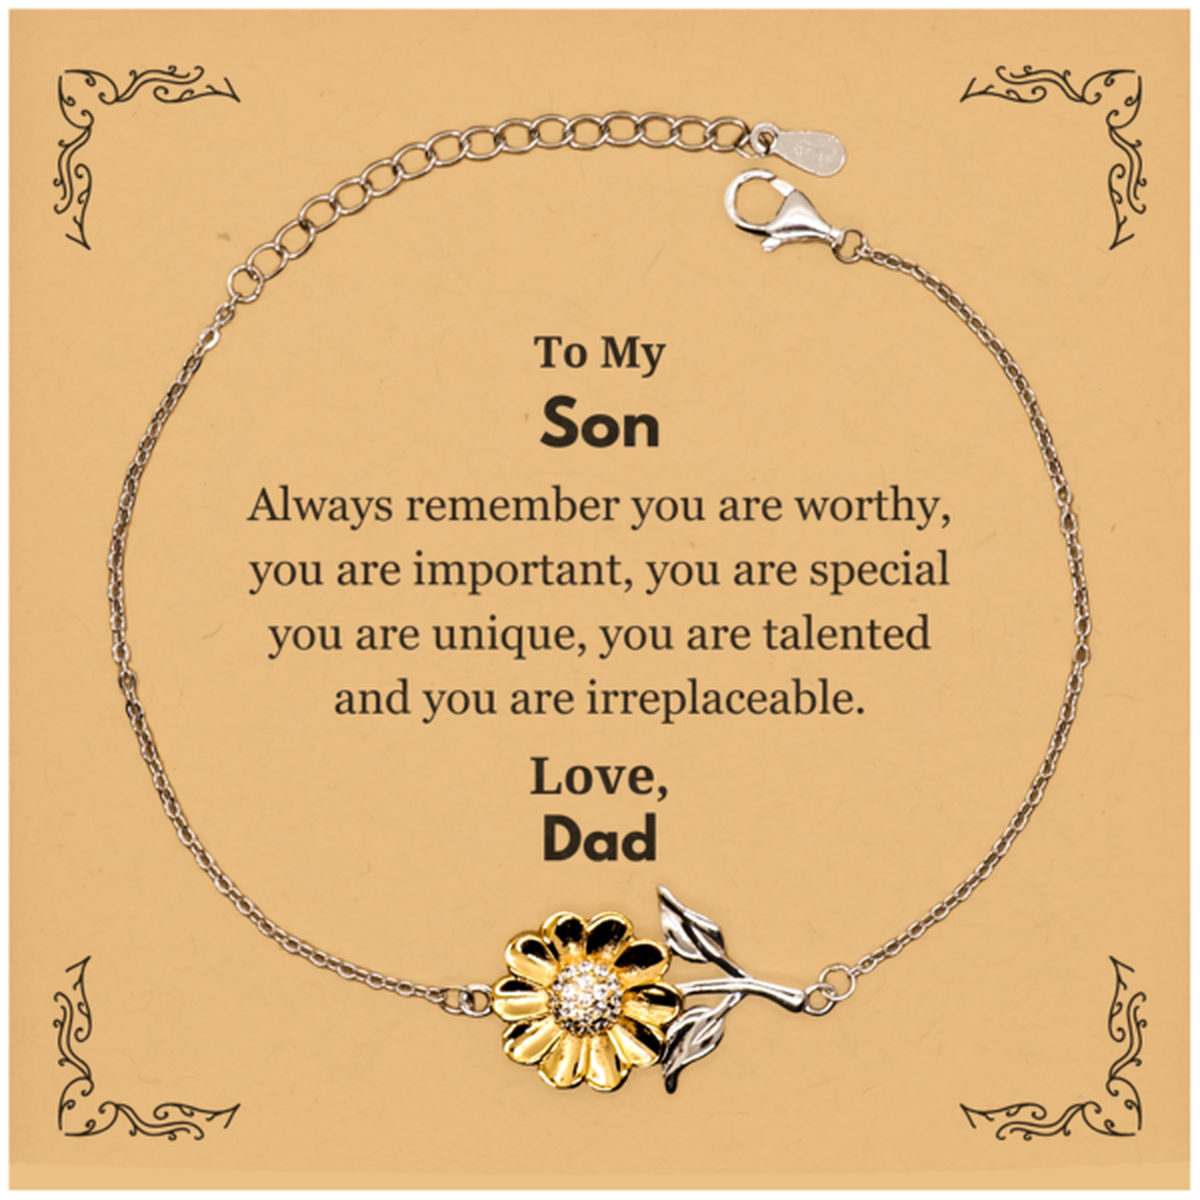 Son Birthday Gifts from Dad, Inspirational Sunflower Bracelet for Son Christmas Graduation Gifts for Son Always remember you are worthy, you are important. Love, Dad